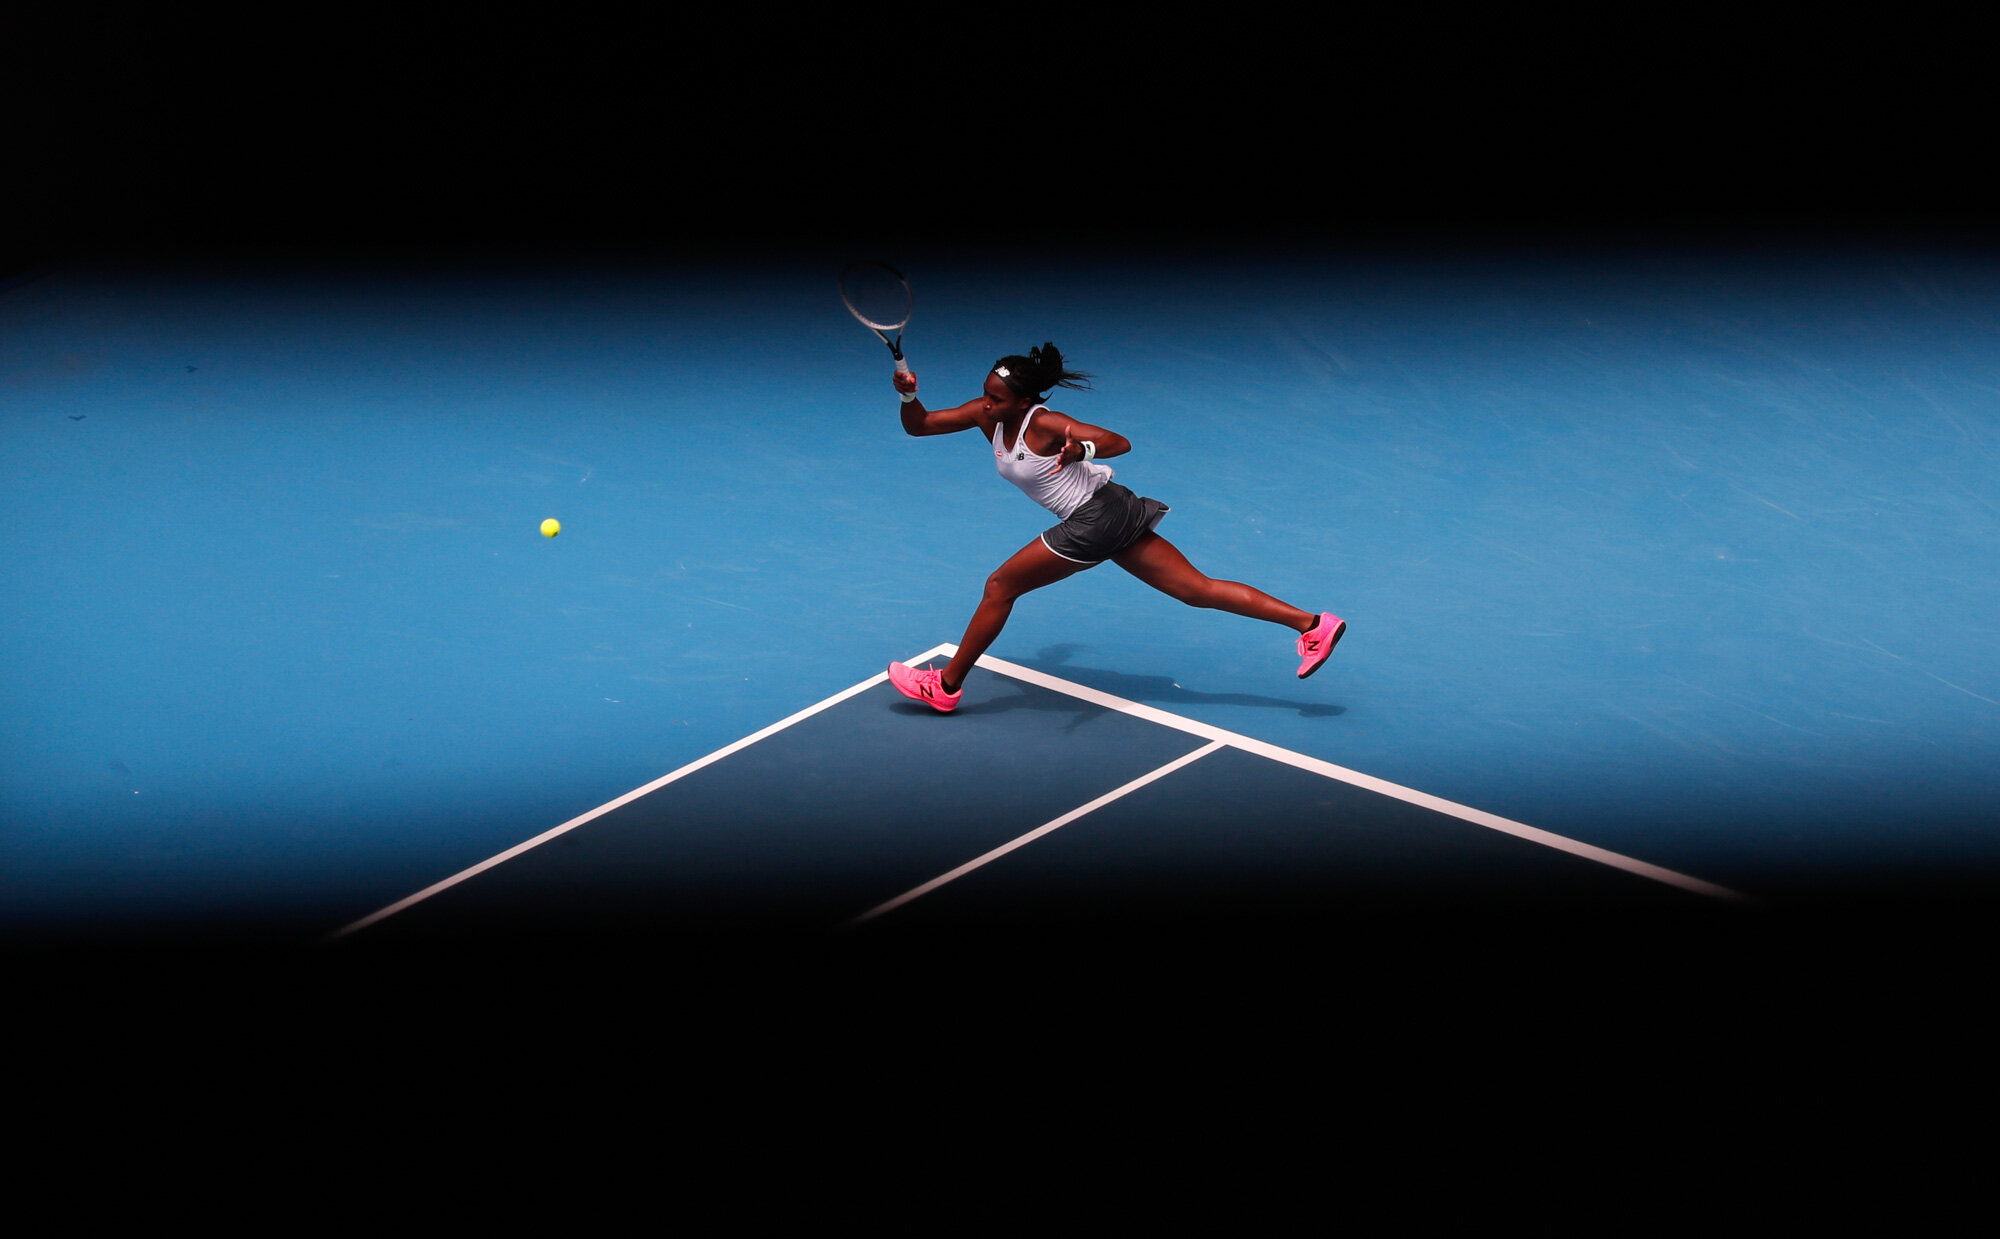  Cori "Coco" Gauff of the U.S. makes a forehand return to Romania's Sorana Cirstea during their second round singles match at the Australian Open tennis championship in Melbourne, Australia, on Jan. 22, 2020. (AP Photo/Lee Jin-man) 